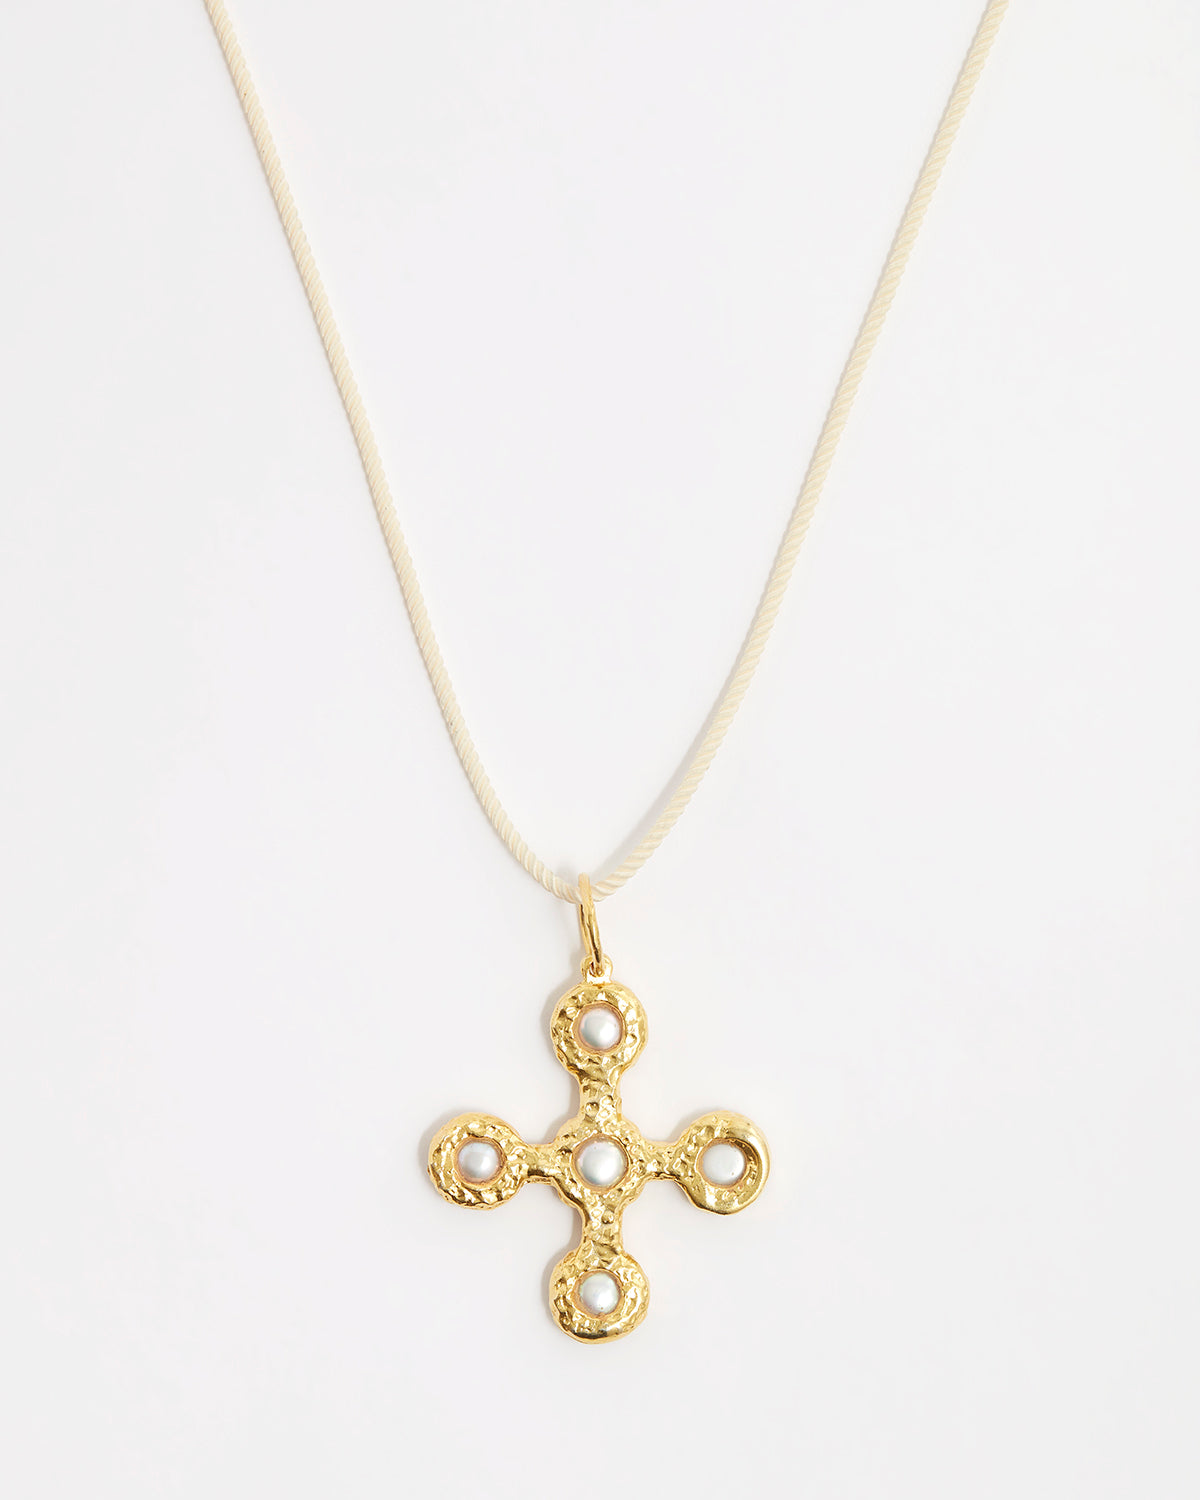 Necklace Pearl Cross Cord Gold-White